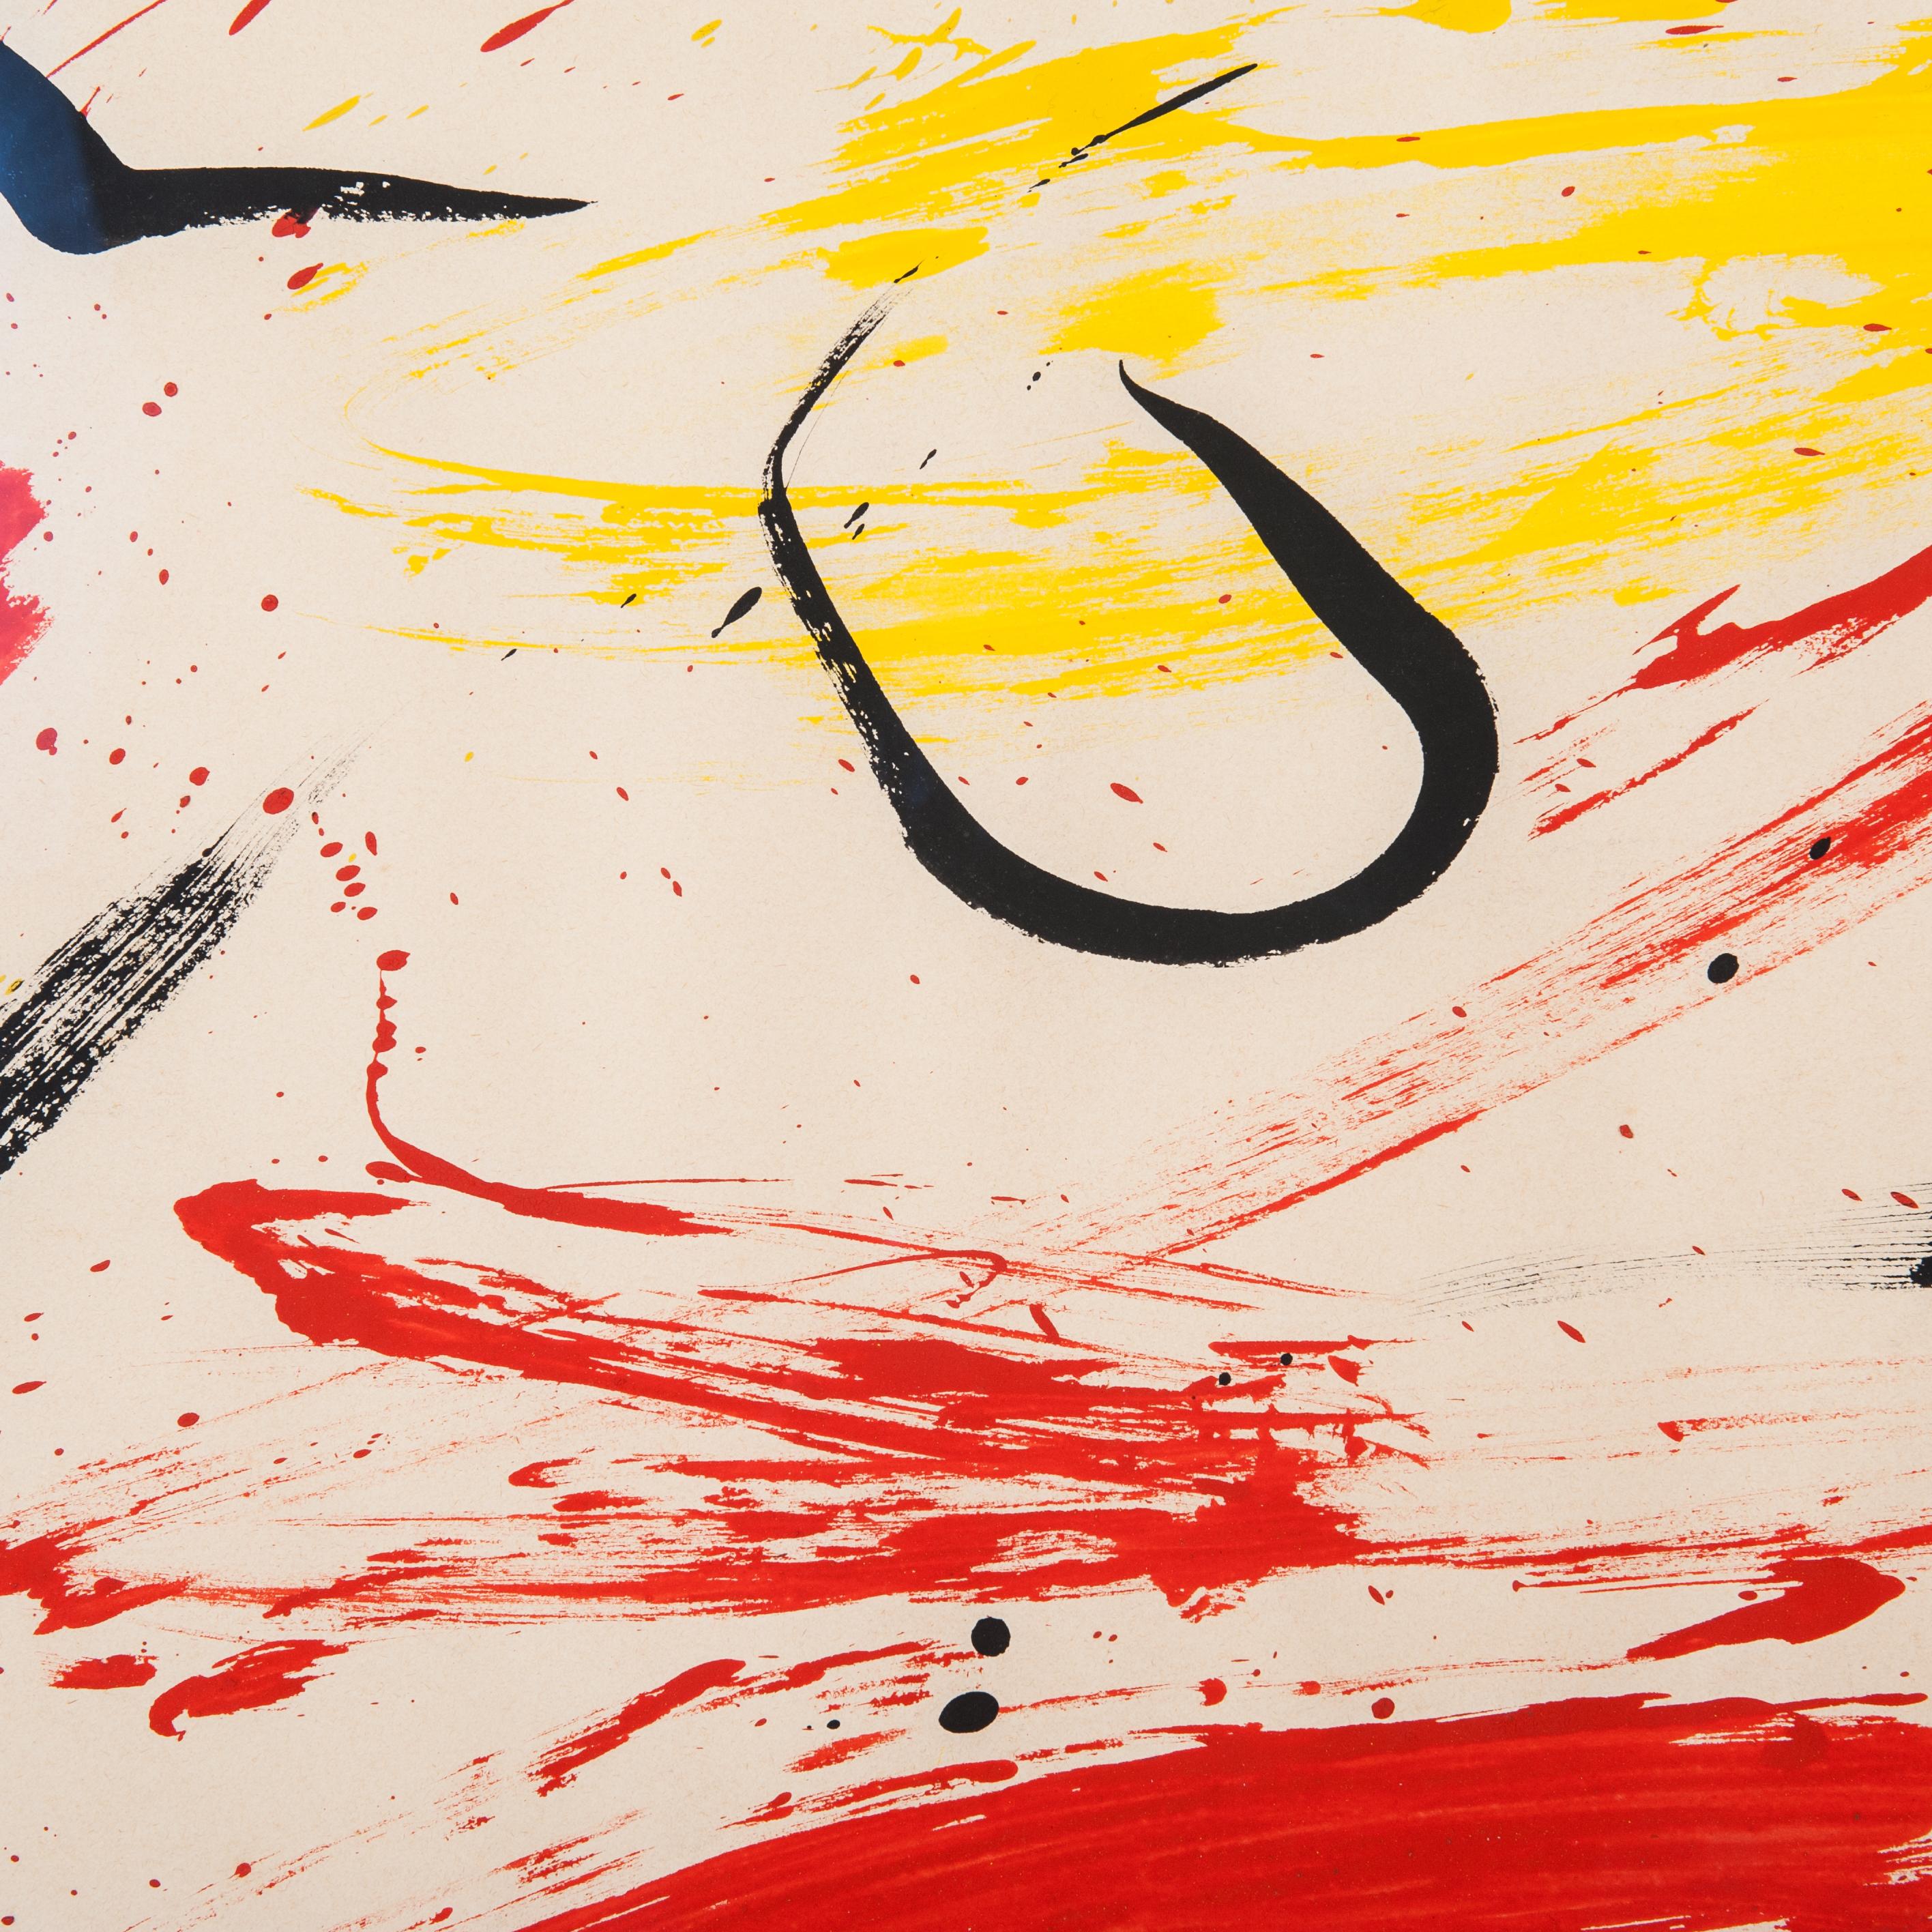 Modern Informal Painting ‘Gouache’ Color Black, Yellow, Red by Helmut Zimmermann, 1985